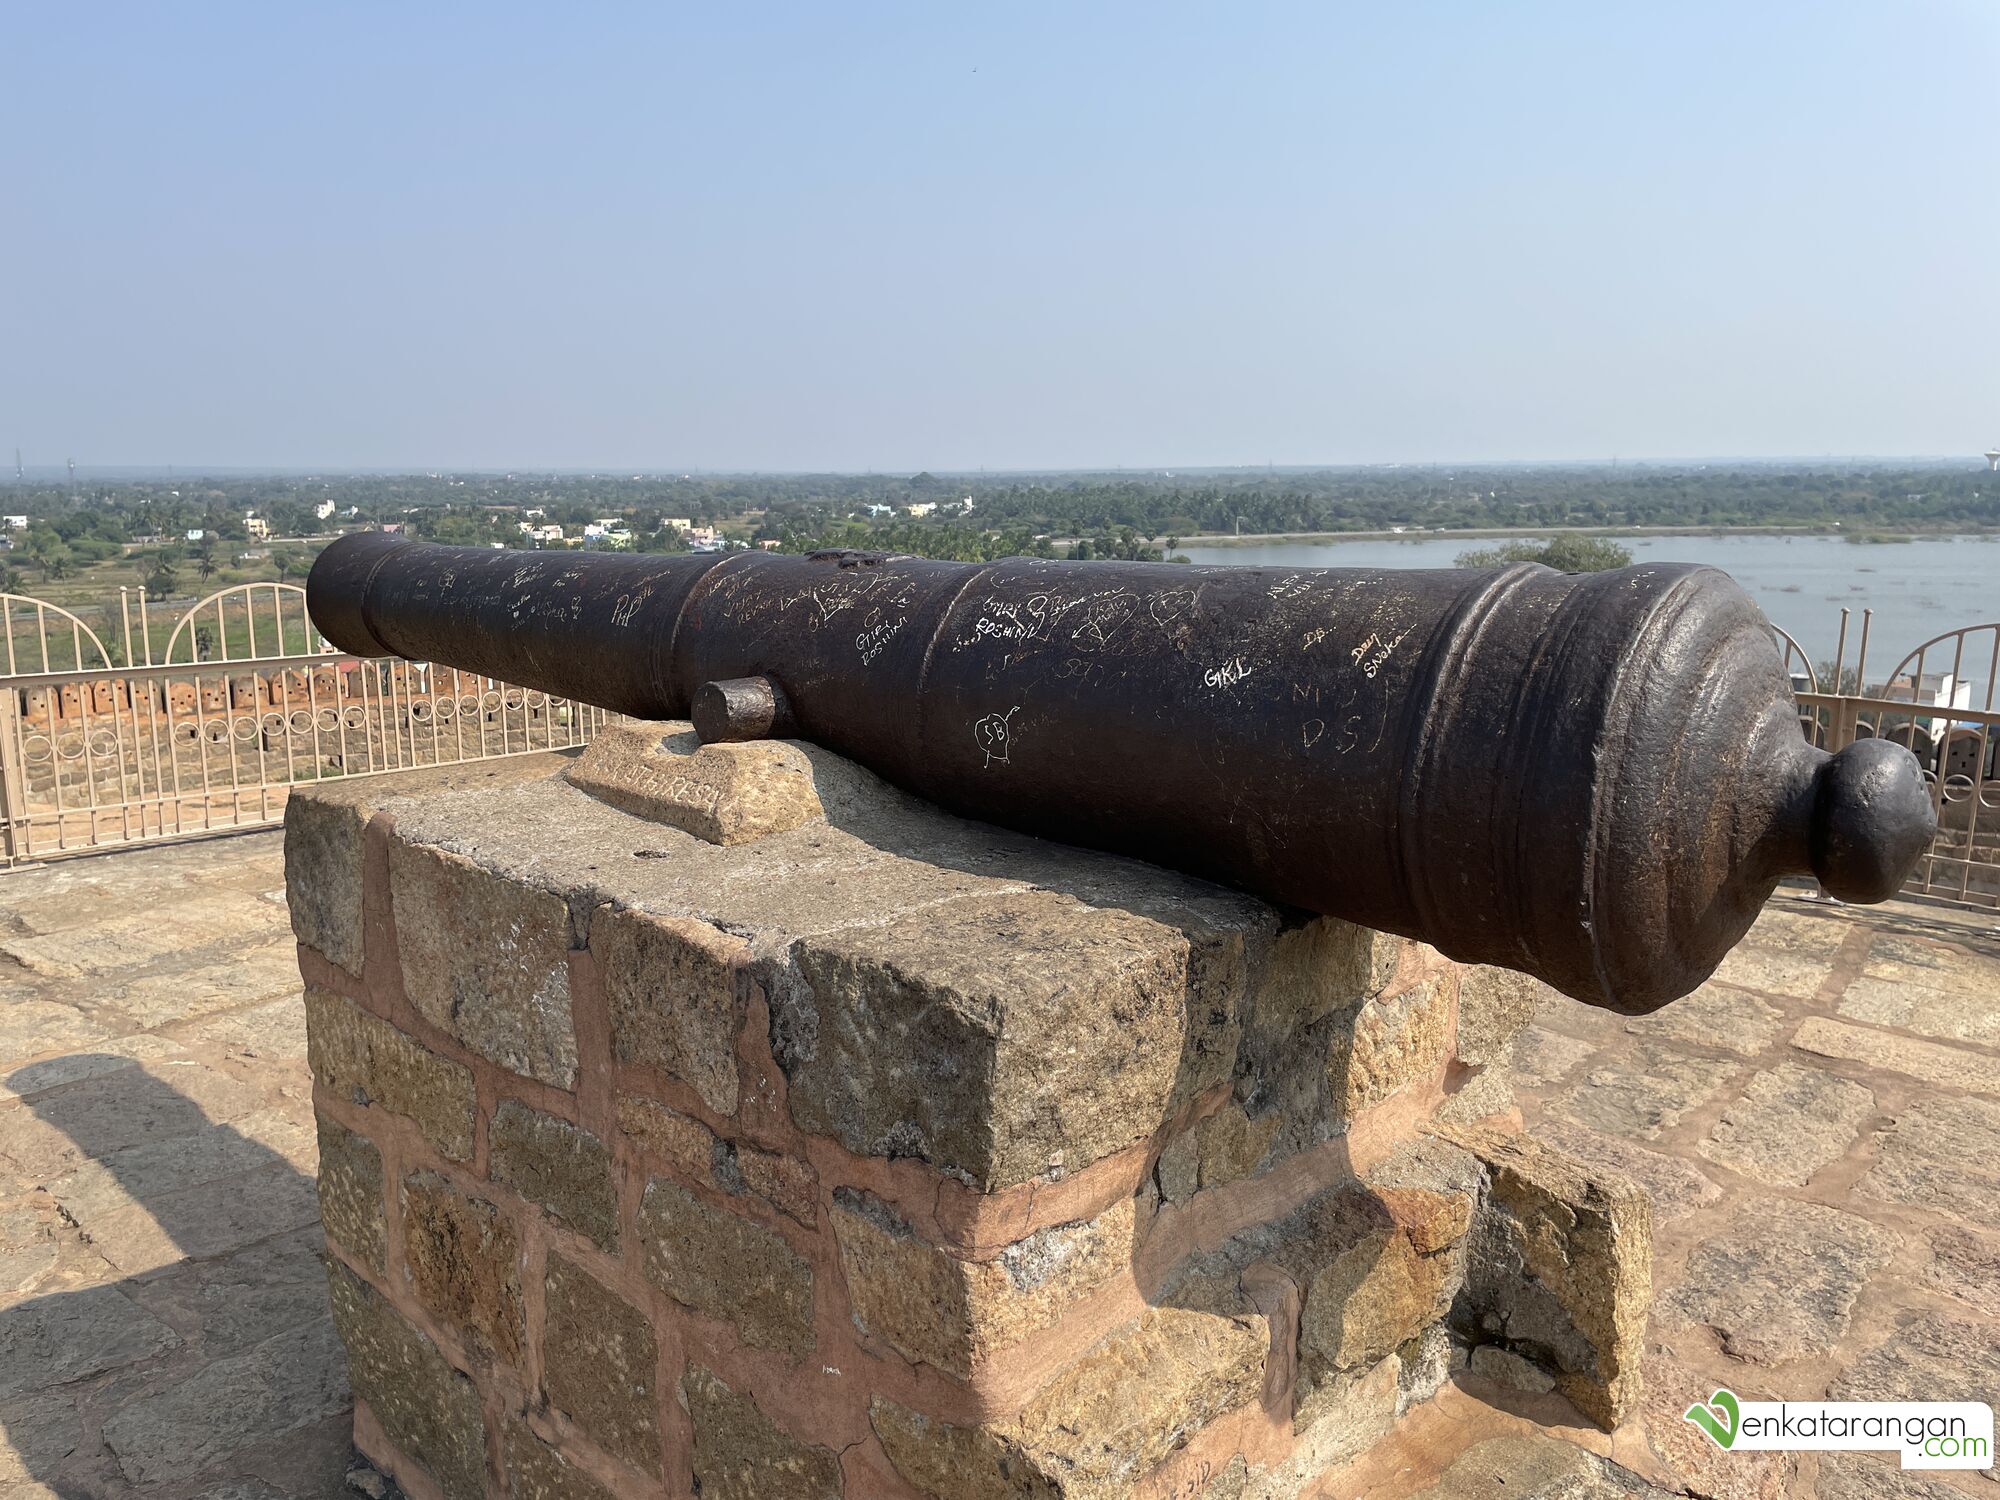 The long cannon (பீரங்கி) on top of the Thirumayam fort